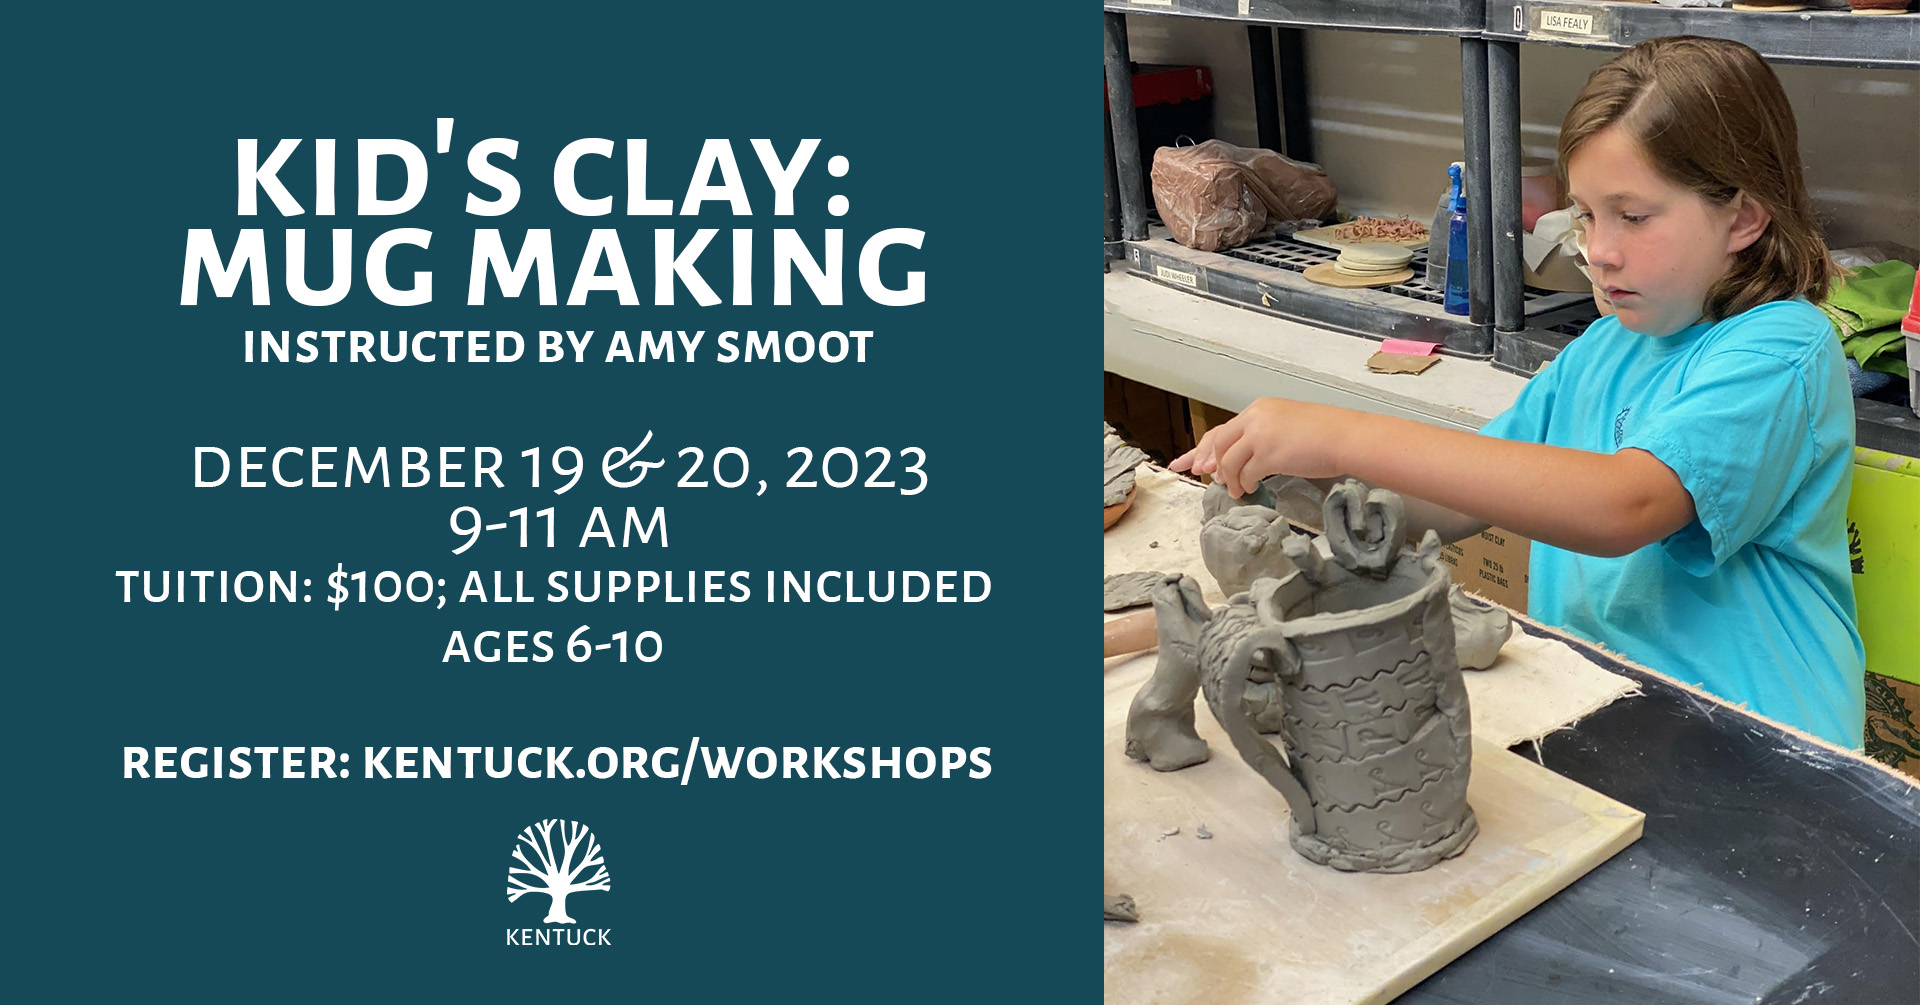 Kid's Clay Mug Making with Amy Smoot: December 2023